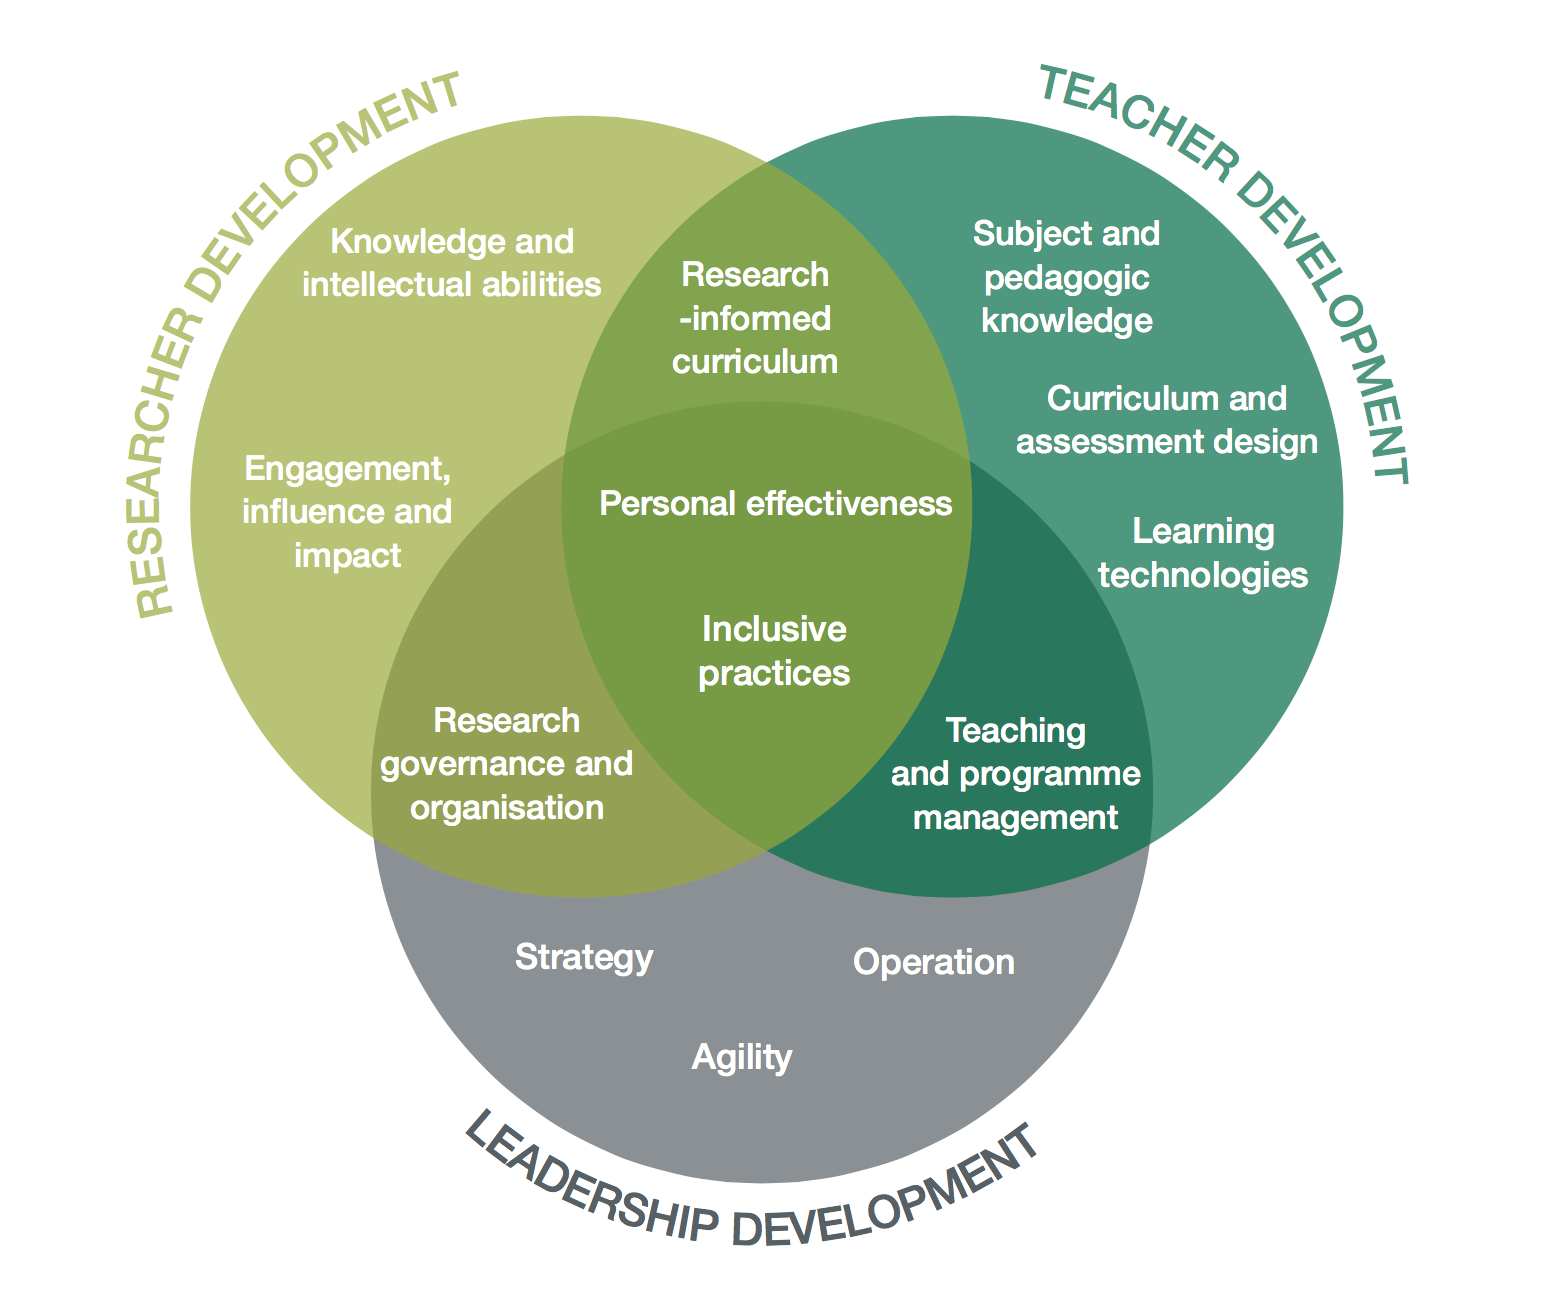 Visual diagram outlining what the academic develoment framework is: the 3 areas cover researcher development, teacher development, leadership development